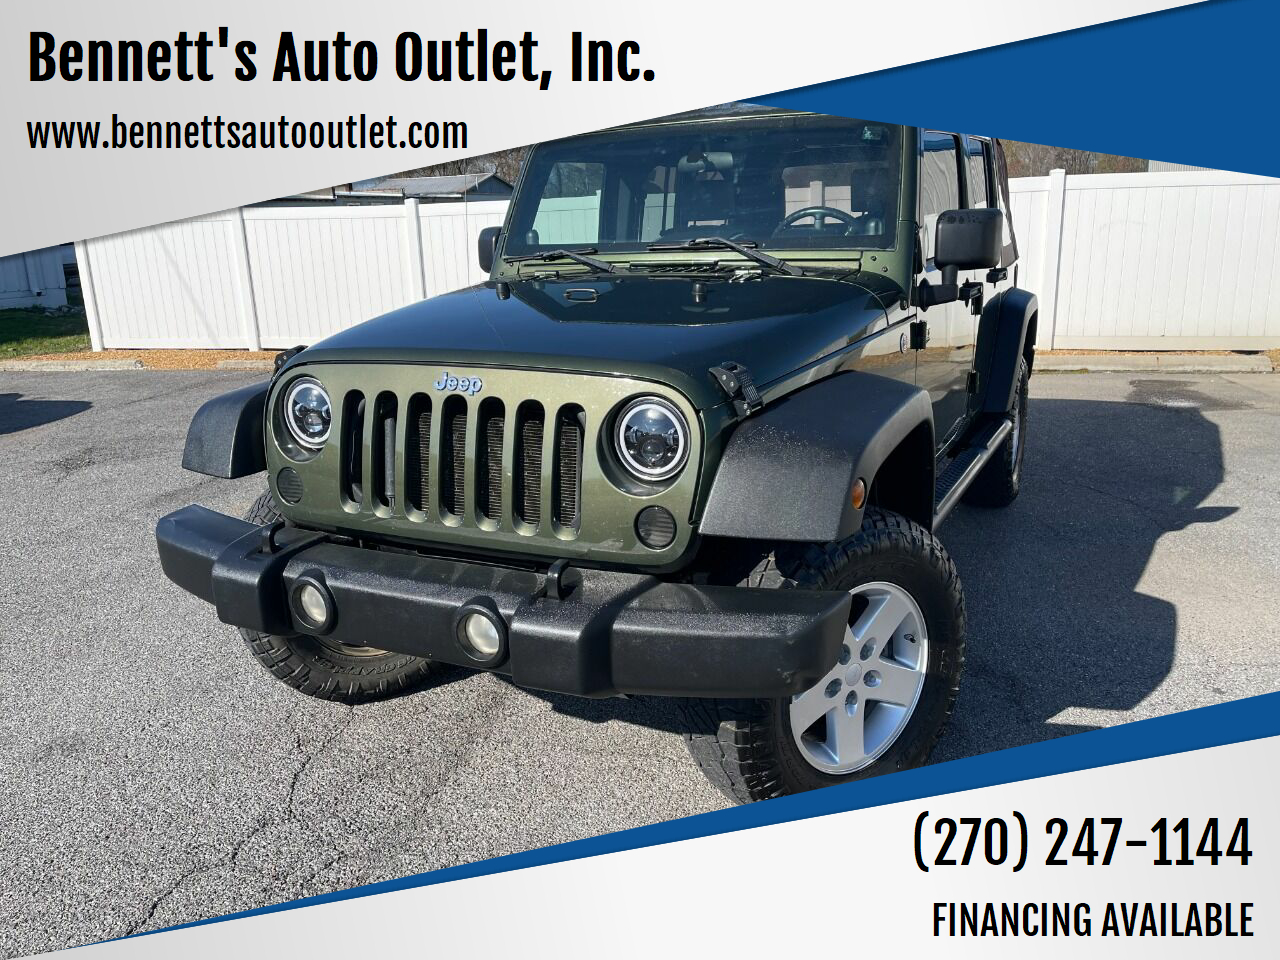 2008 Jeep Wrangler Unlimited For Sale In Kentucky ®